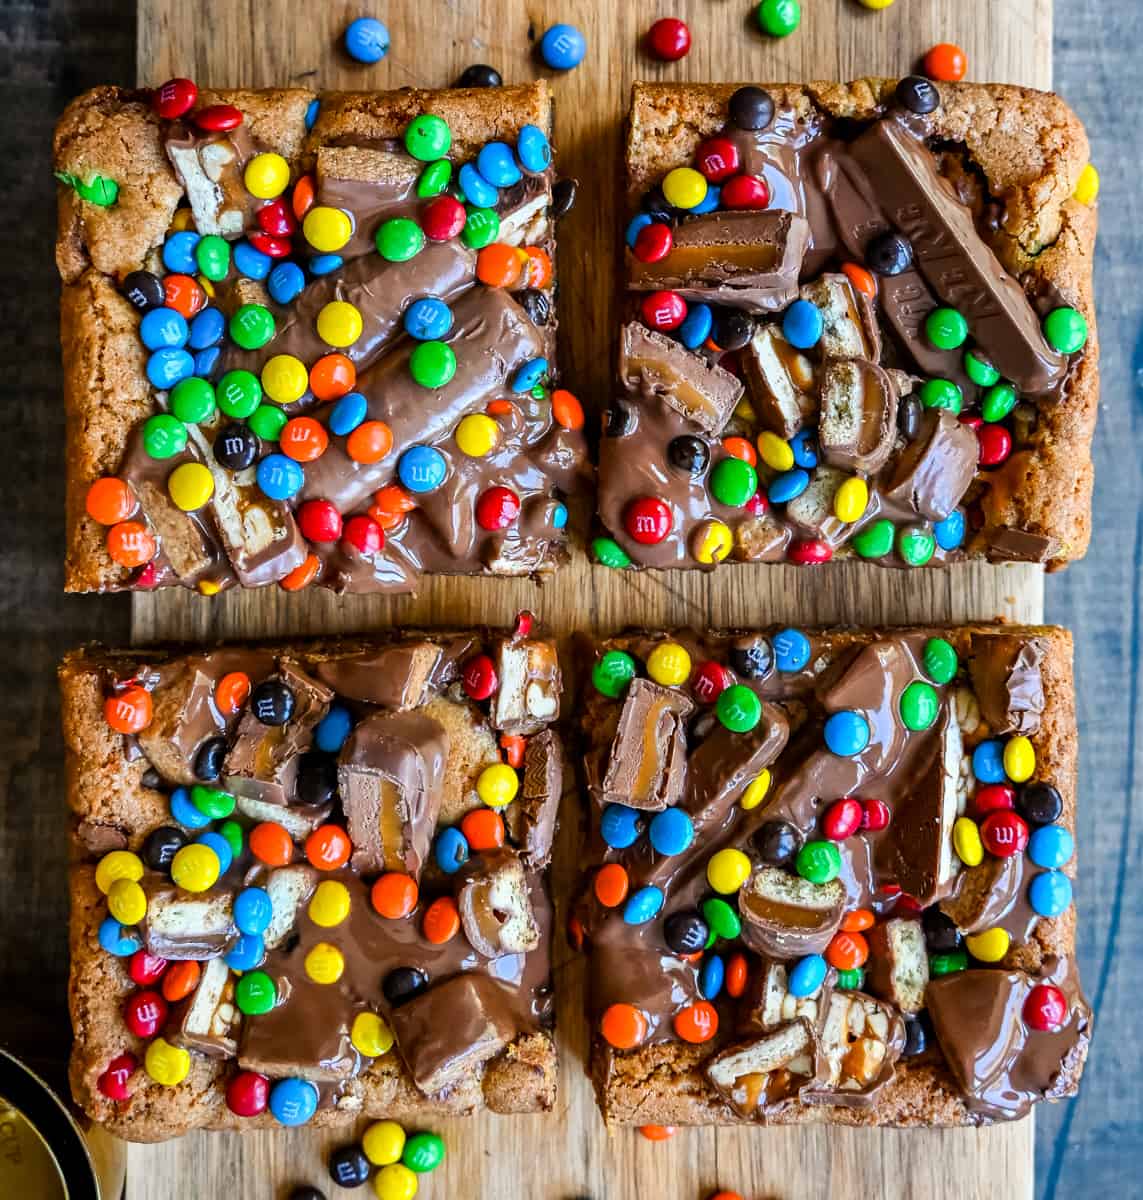 Candy Bar Cookie Bars. An ooey gooey cookie bar topped with an assortment of candy bars. The perfect candy bar blondie dessert to make with Halloween candy.